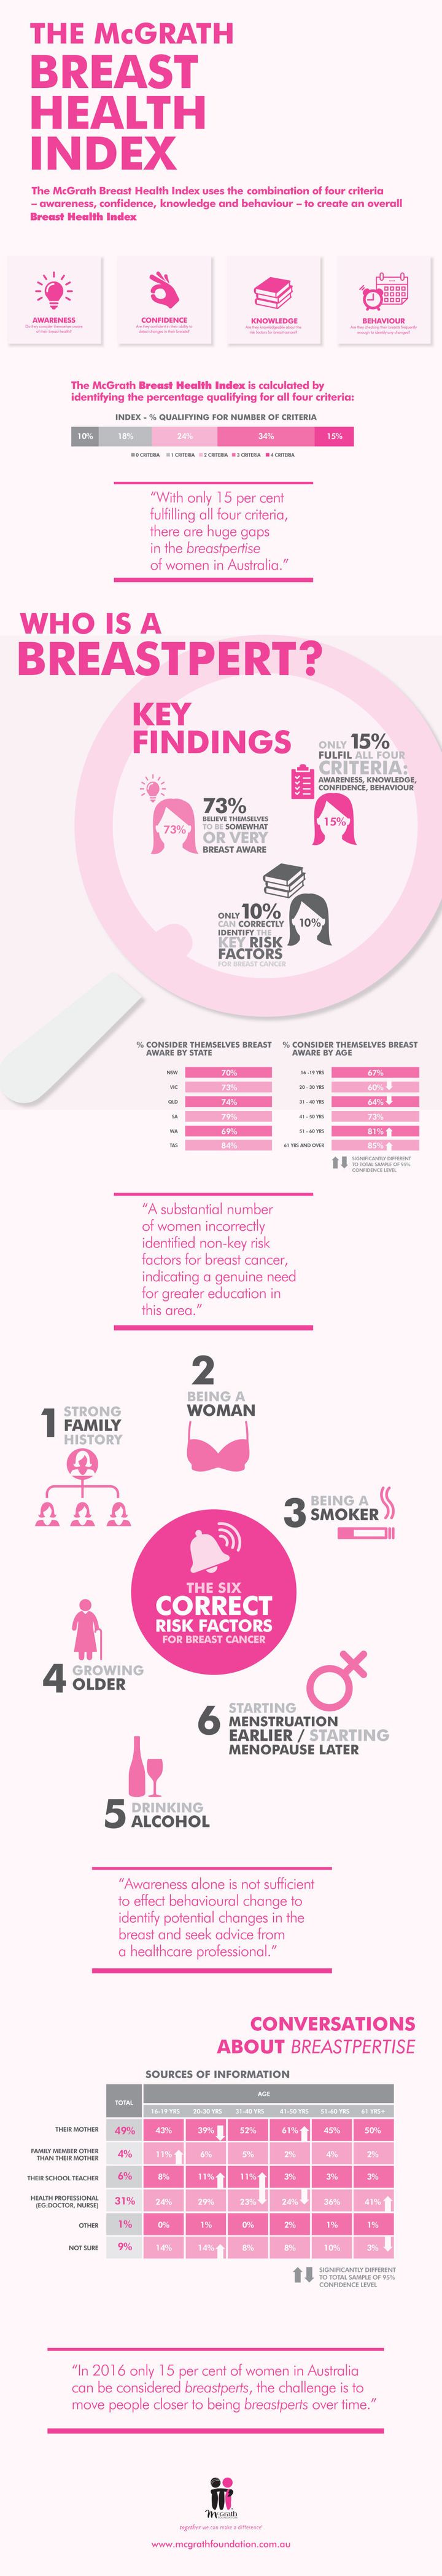 The first ever annual McGrath Breast Health Index, which measures levels of 'breastpertise' among women in Australia.